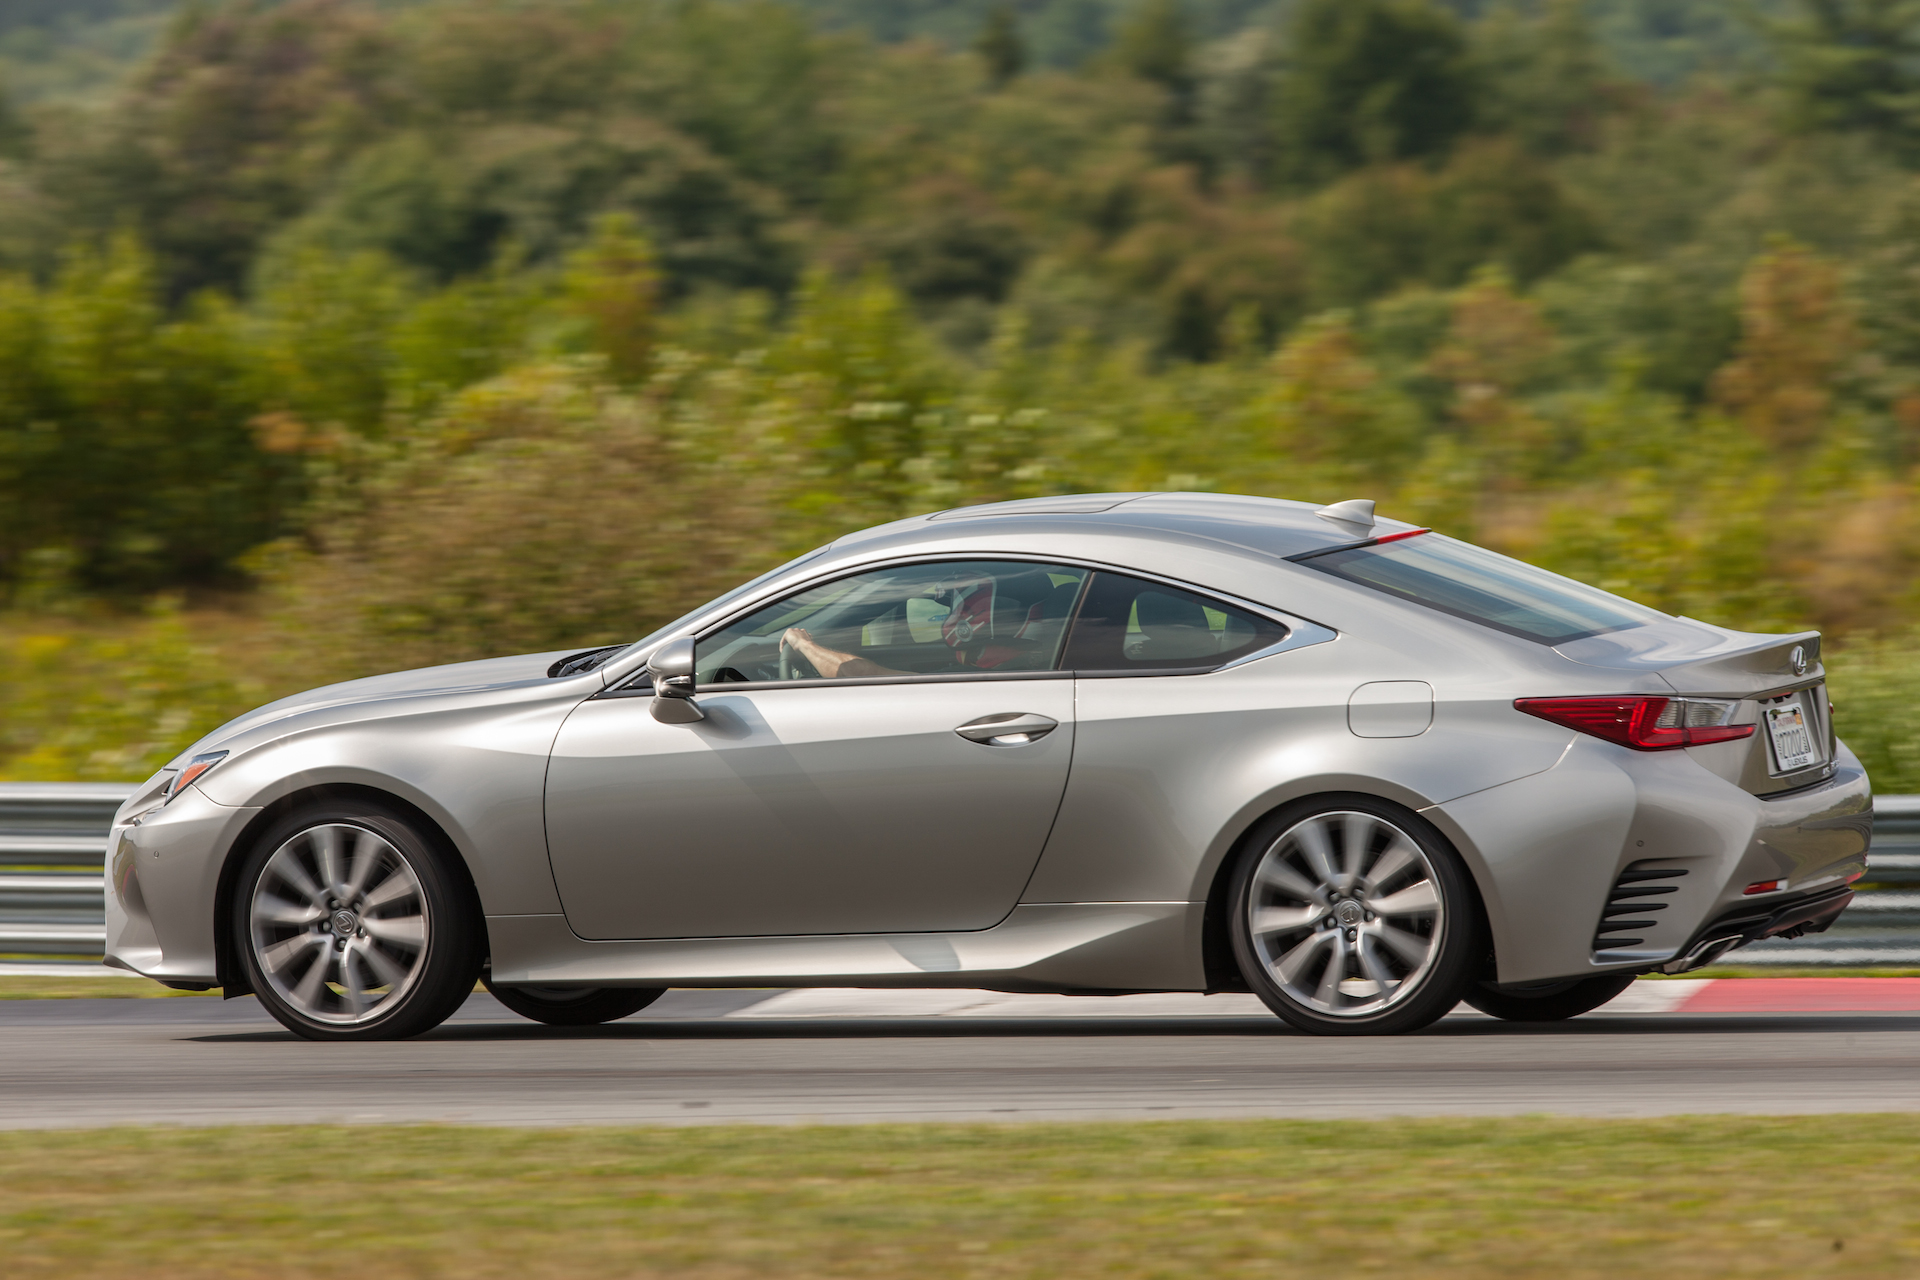 2016 Lexus RC 200t Coming To U.S. With 2.0-Liter Turbo Four